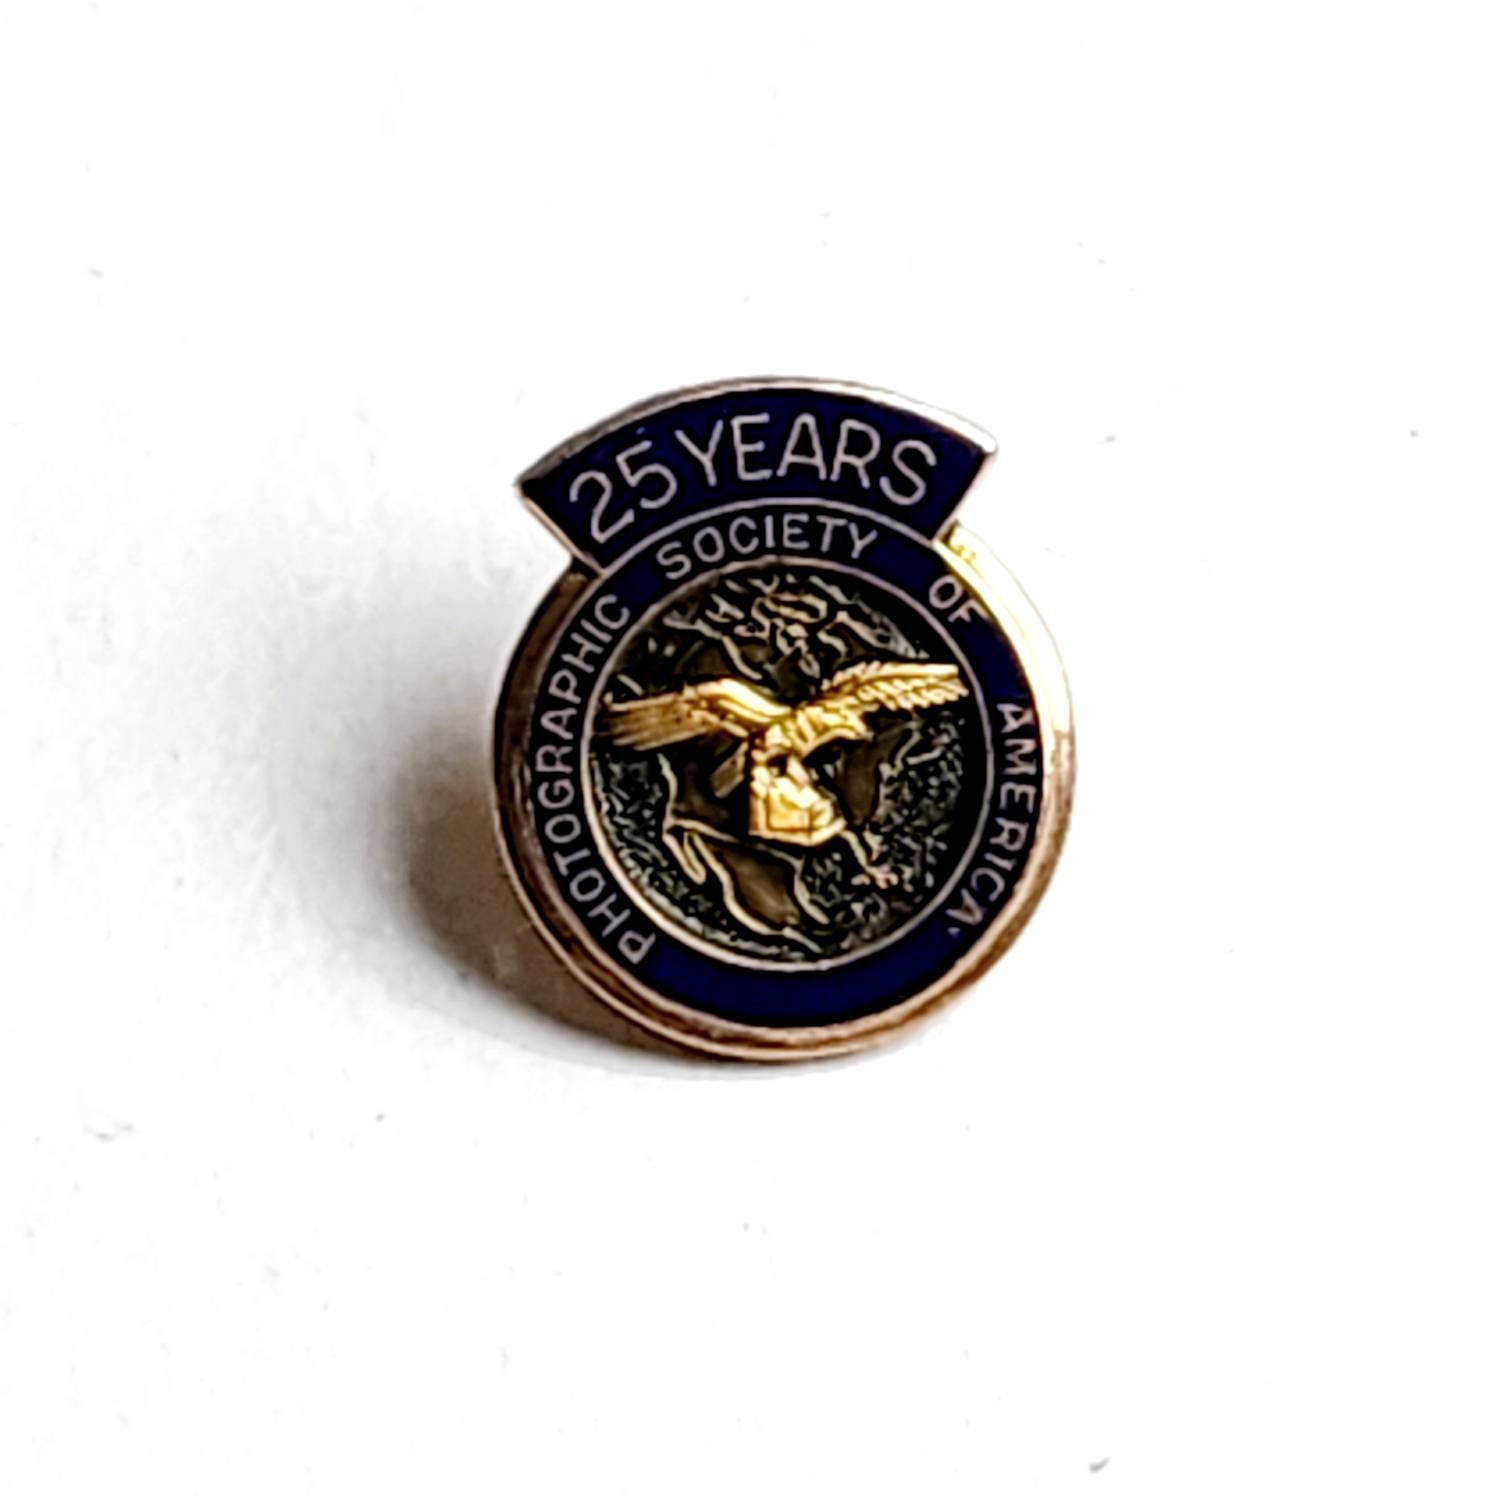 25 Years Photographic Society of America Lapel Pin, 10K Gold Screw